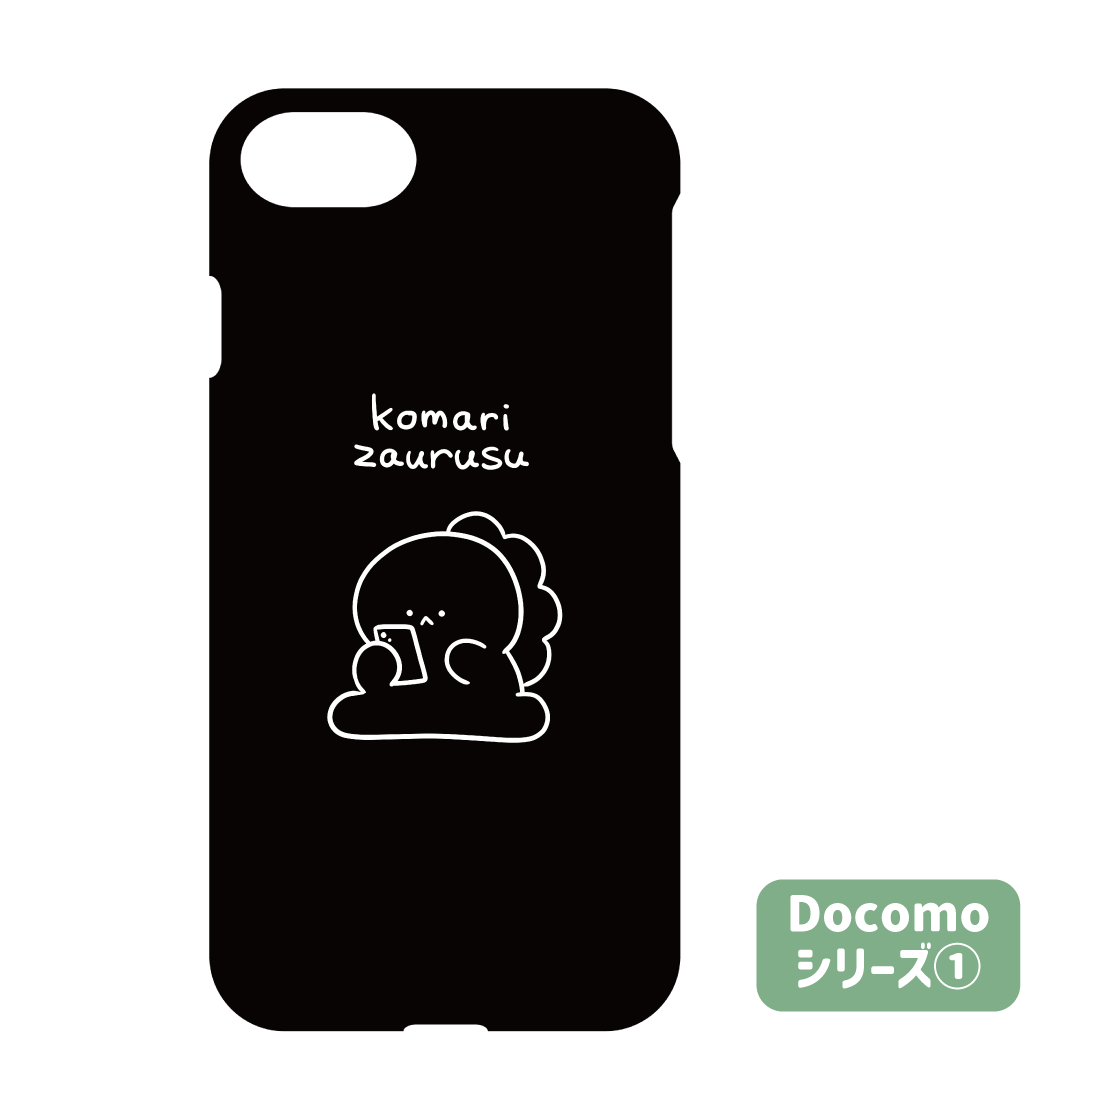 [Troublesome Zaurus] Smartphone case compatible with almost all models Docomo① (Troubled Zaurus) [Shipped in early June]